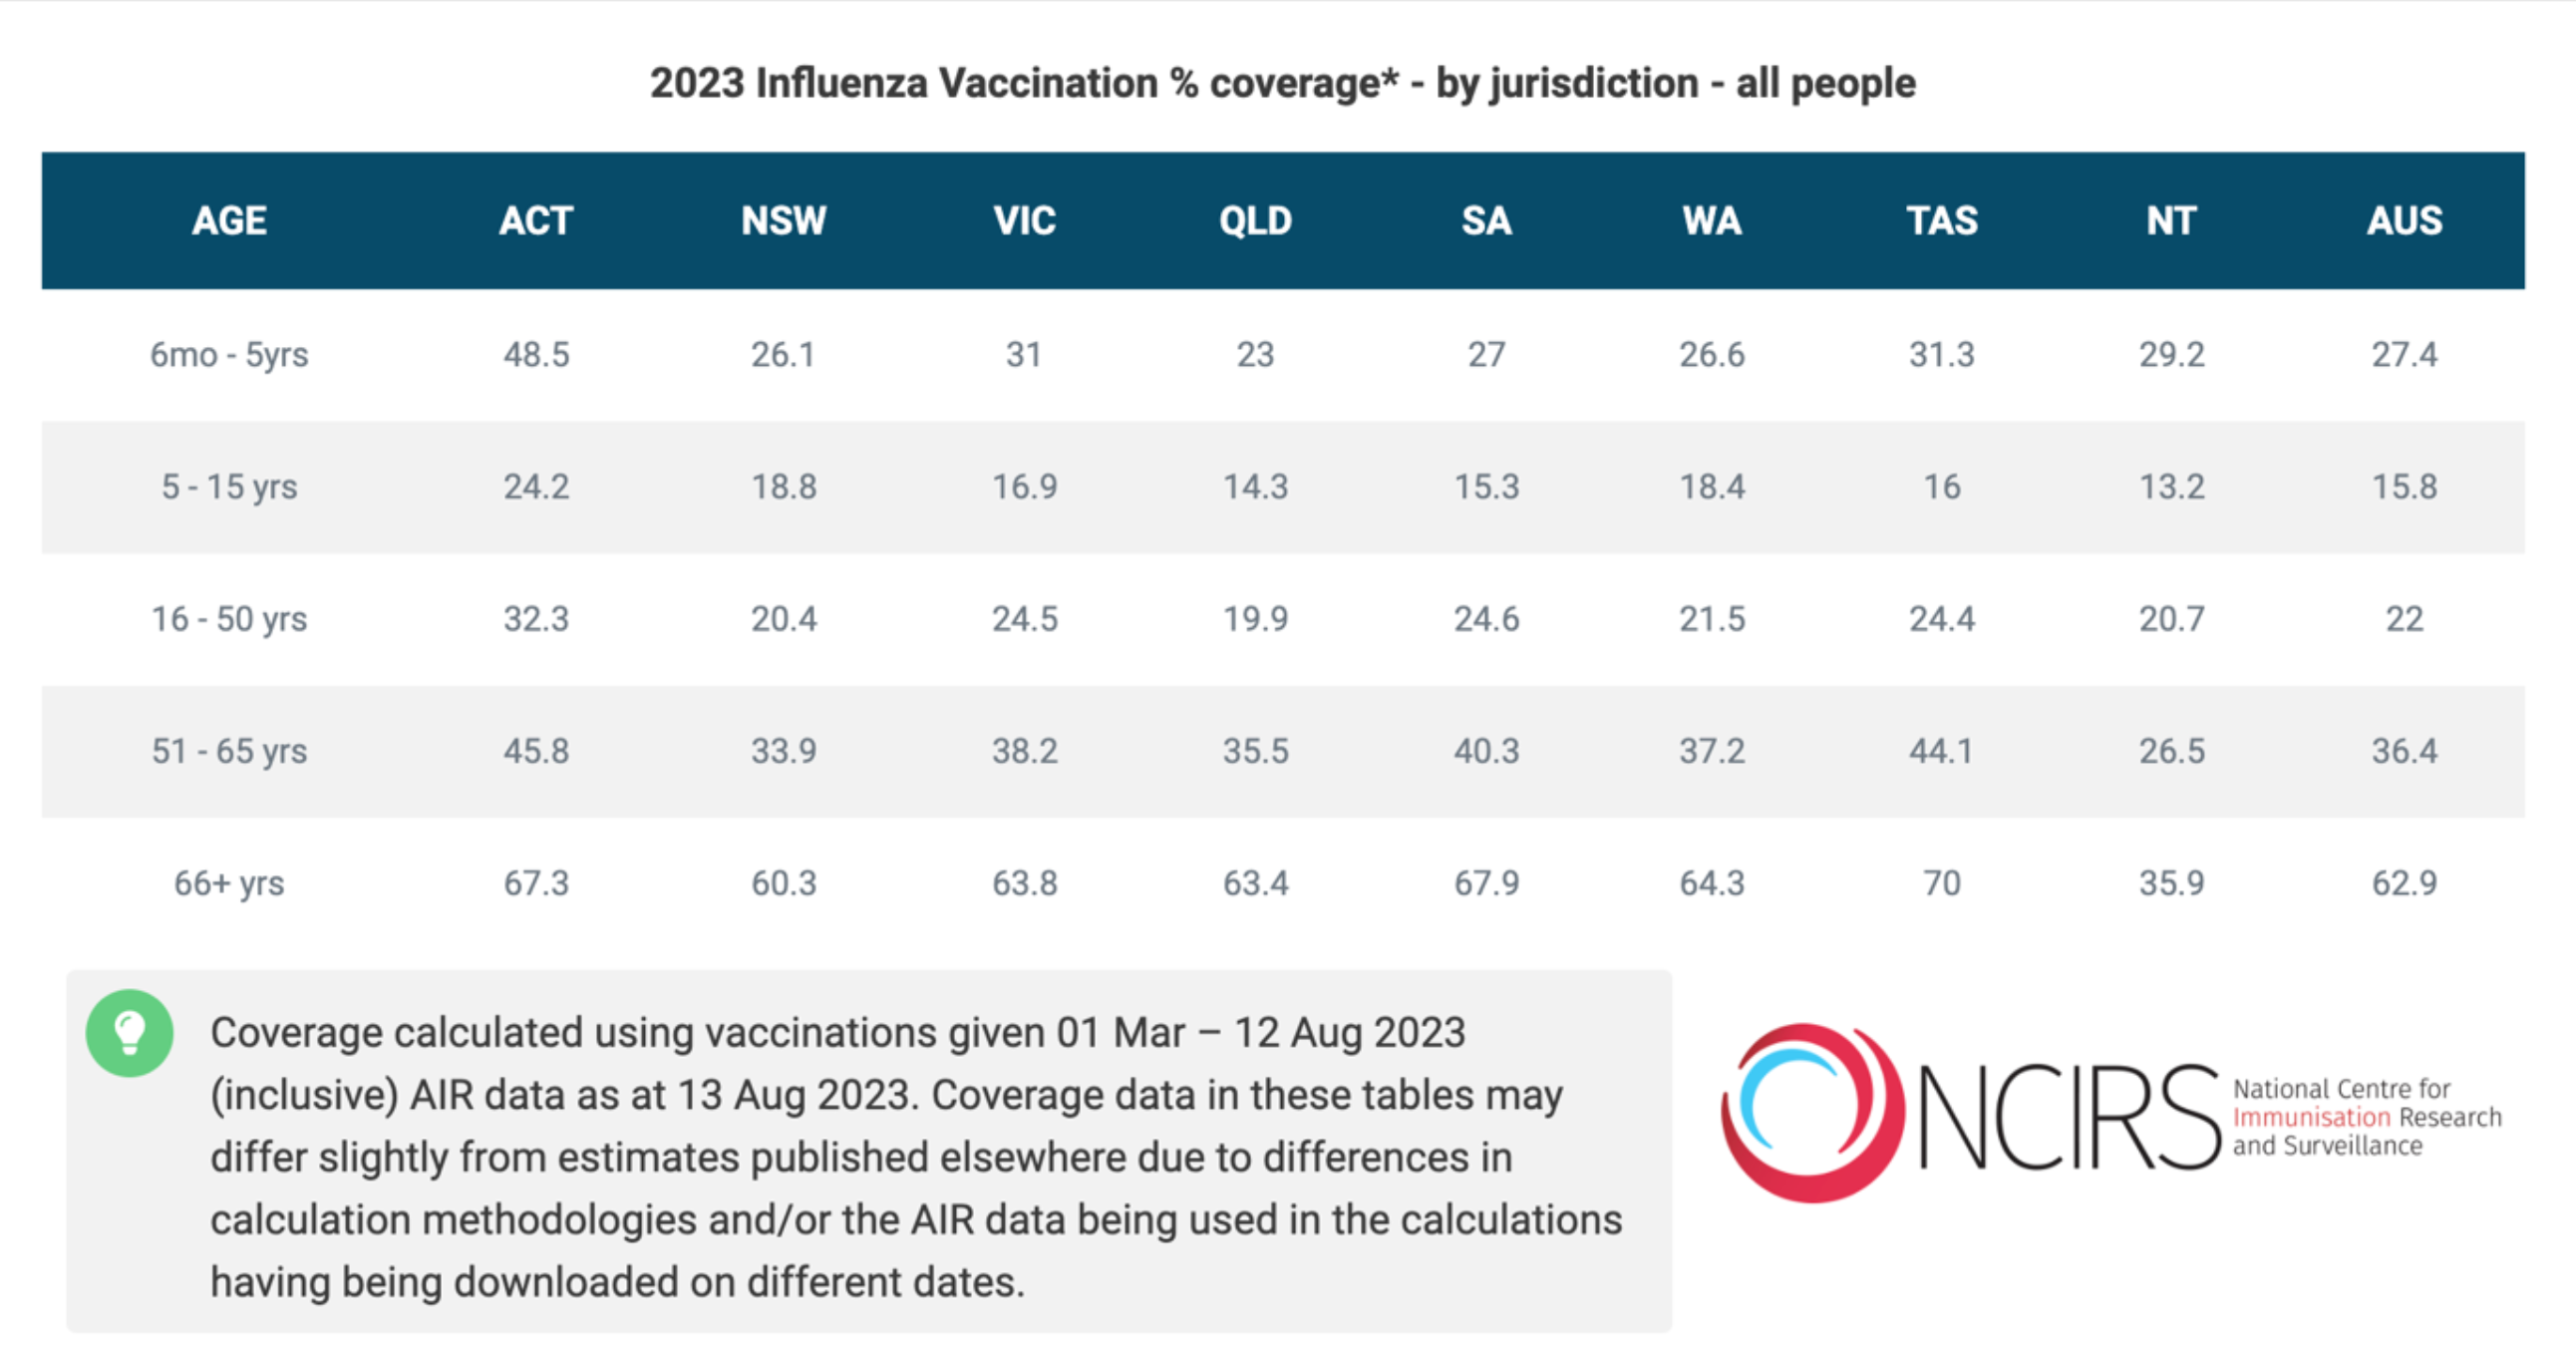 2023 Flu Vaccination % coverage by jurisdiction - all people